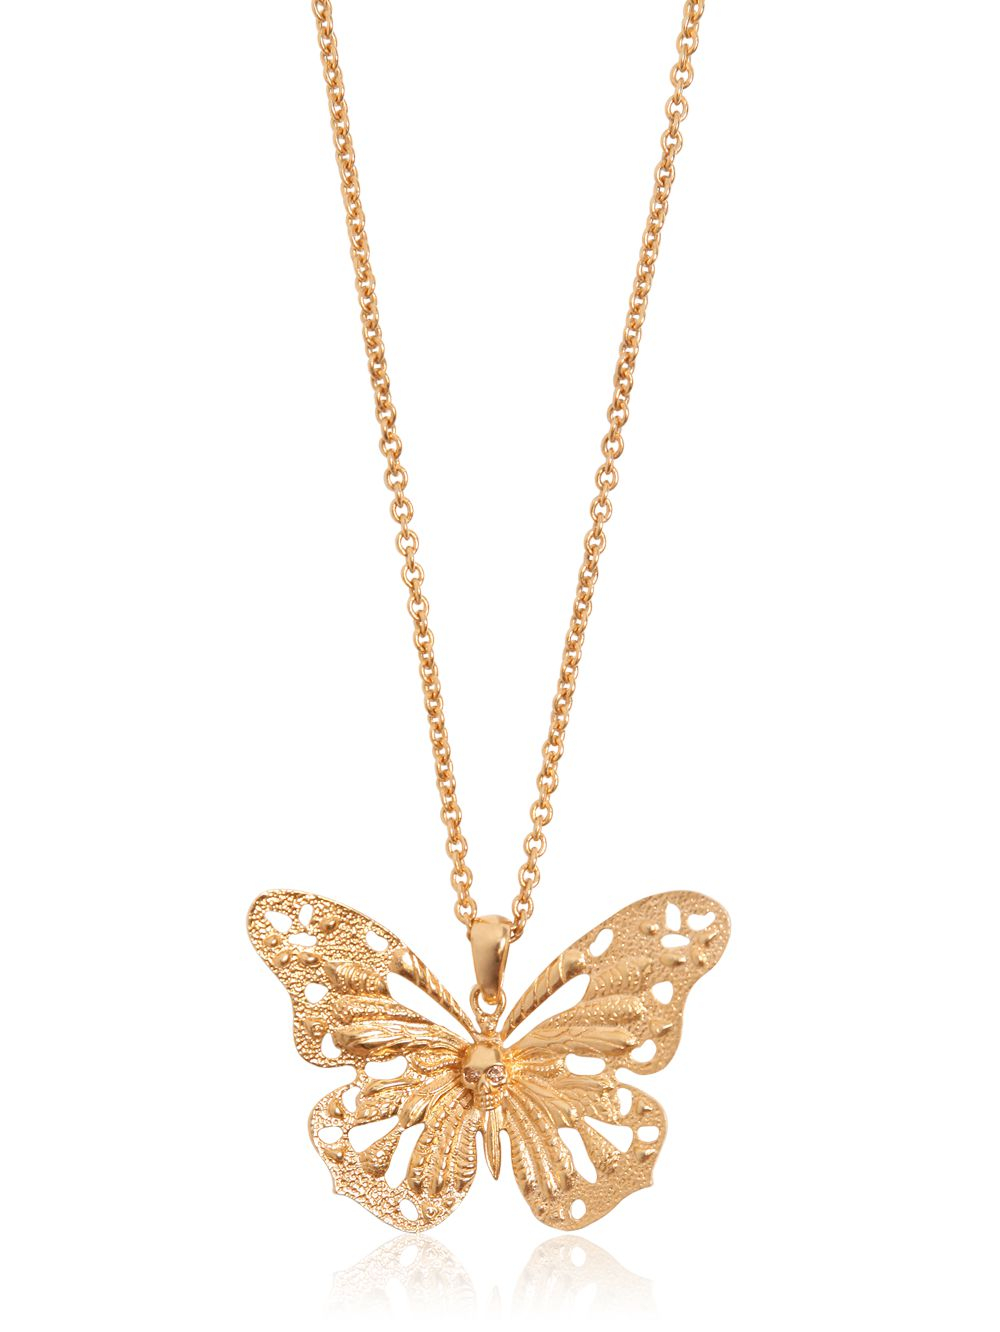 Butterfly Pendant Necklace in Gold 